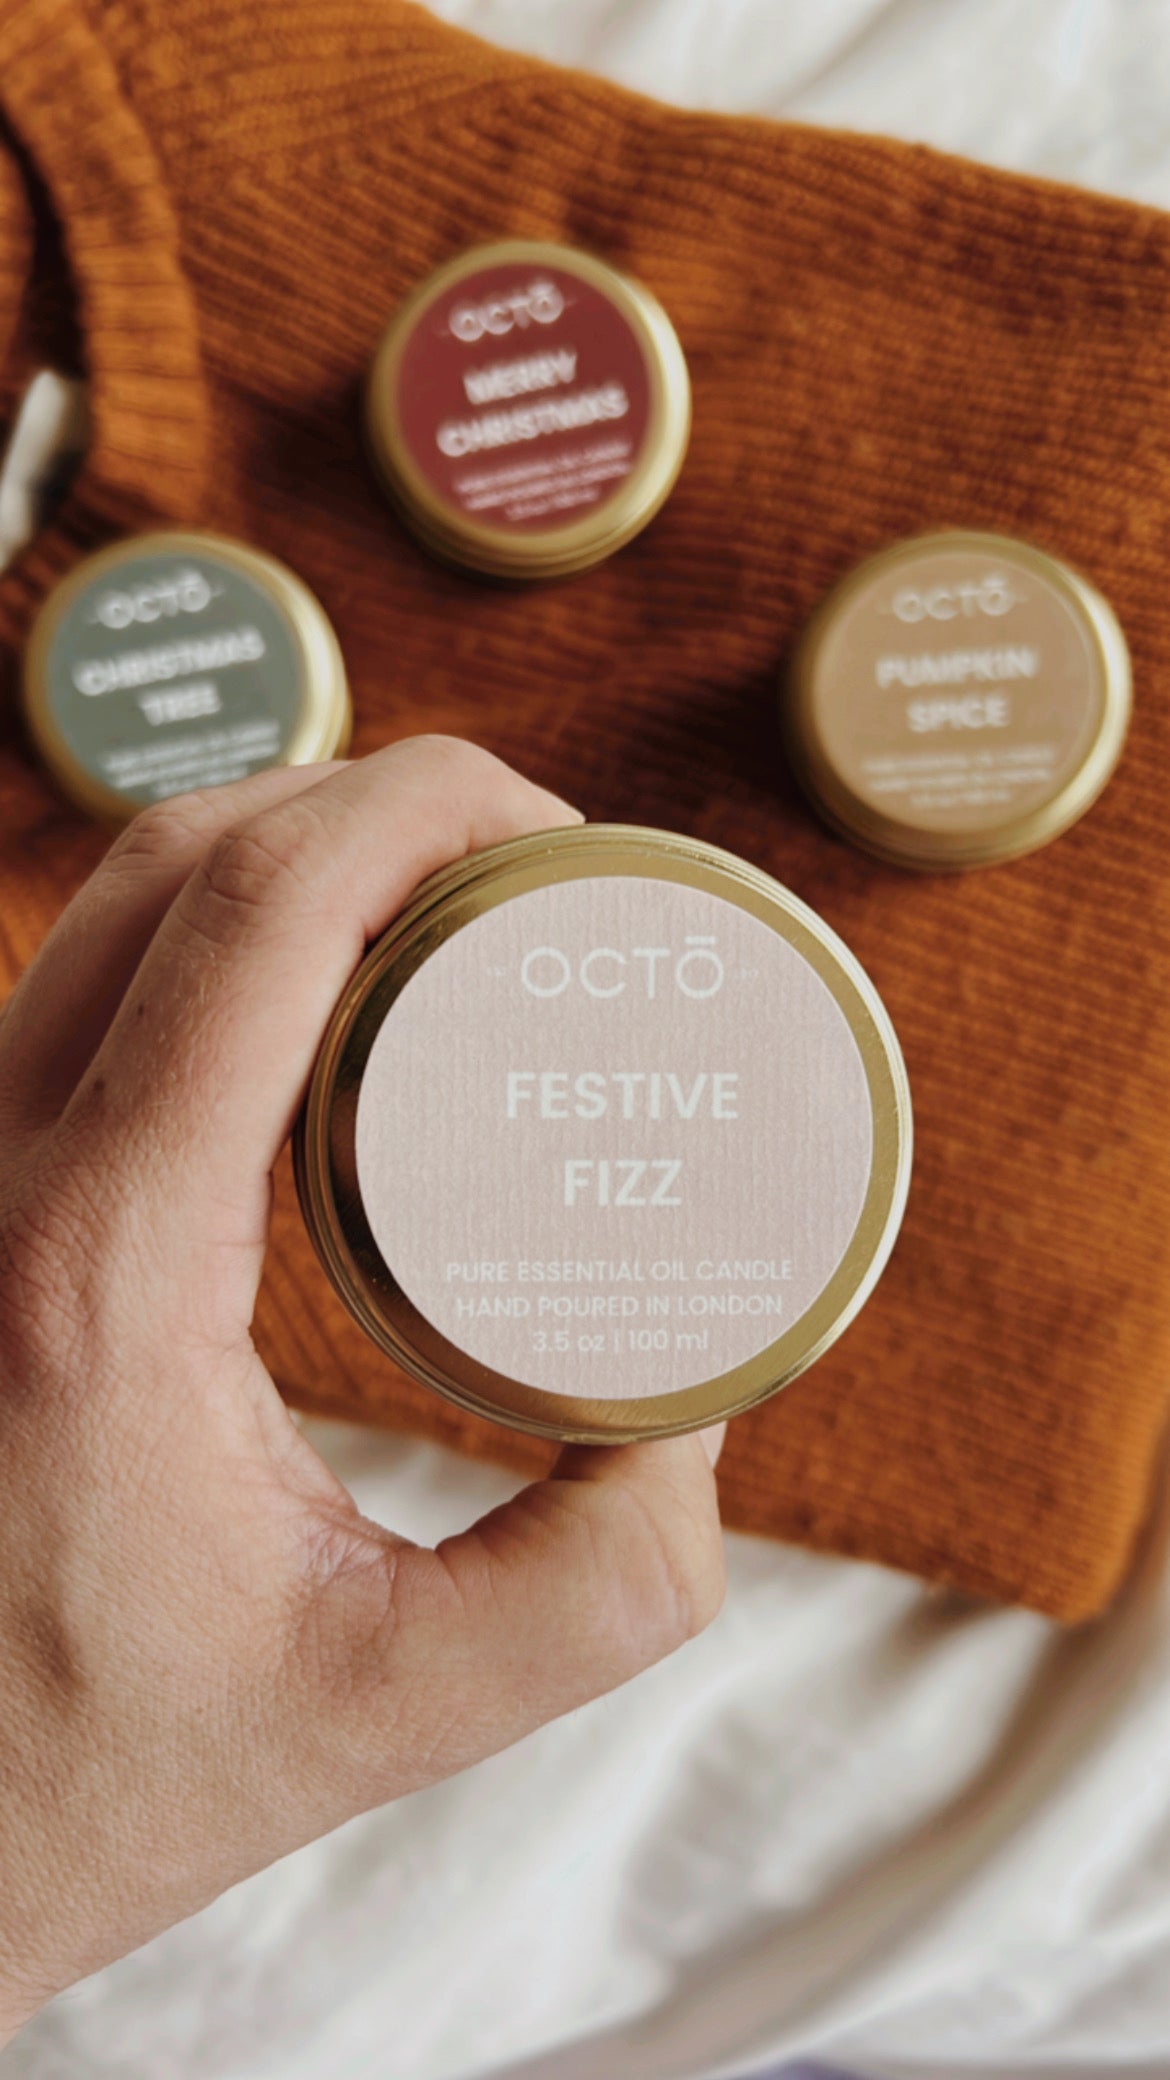 Festive collection tins 100ml